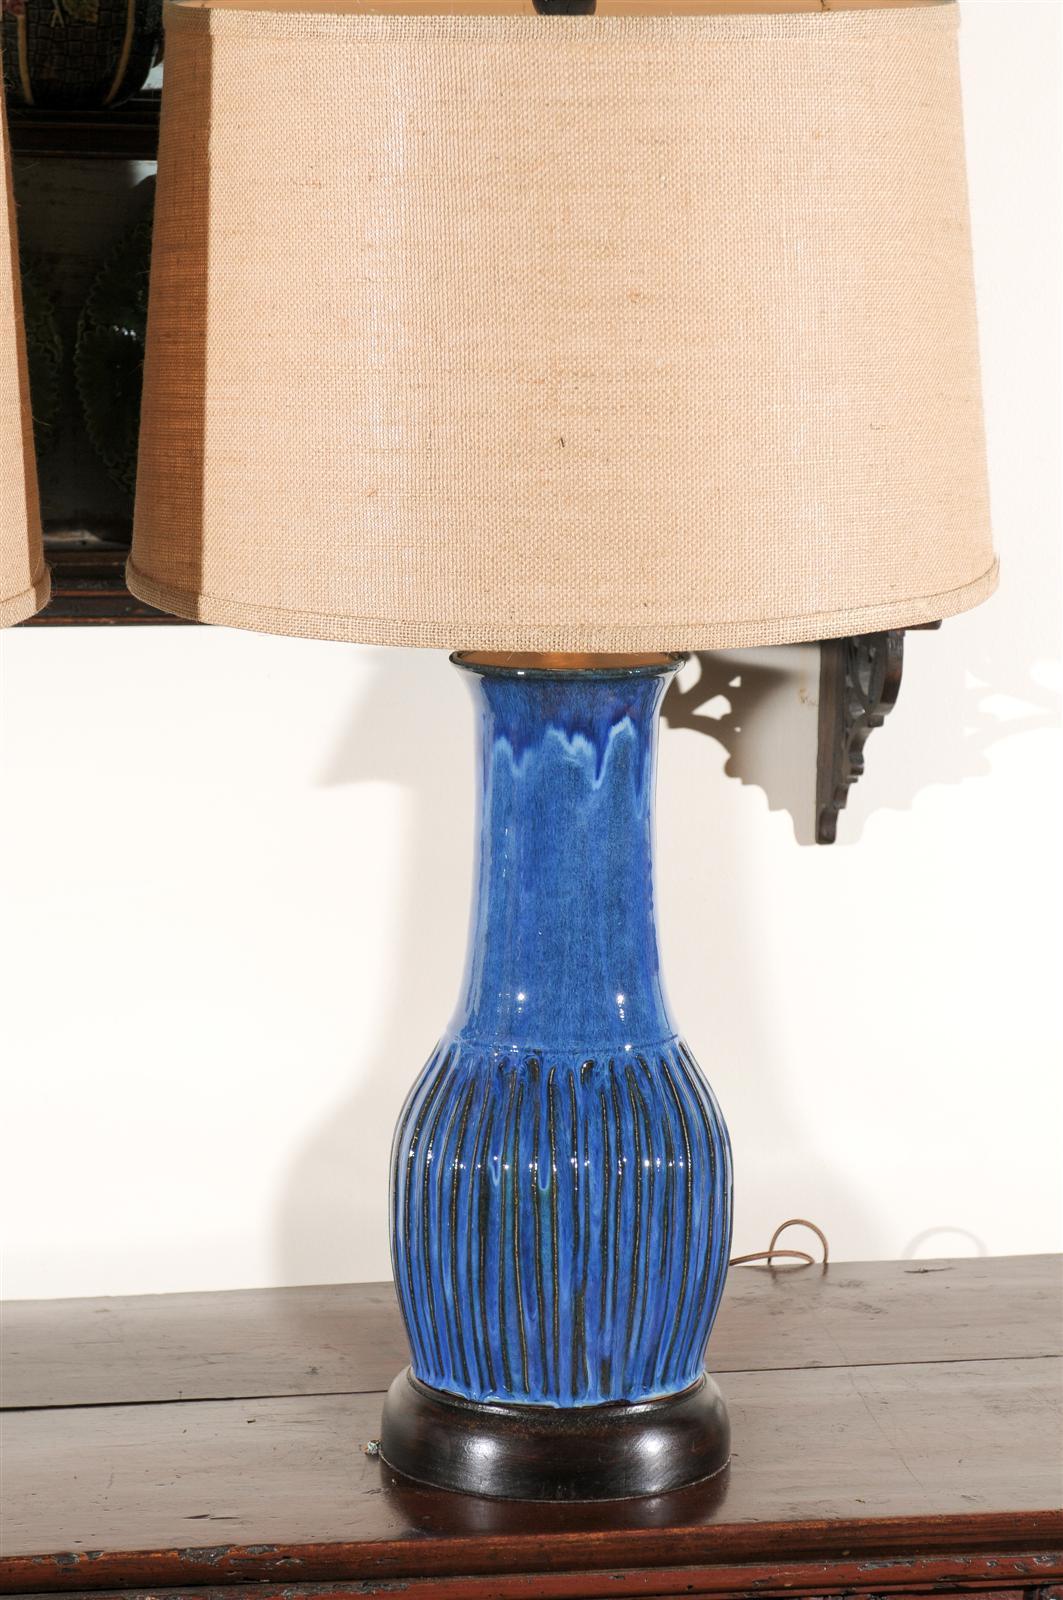 American Original Hand-Turned Lamps by a Local Georgia Potter